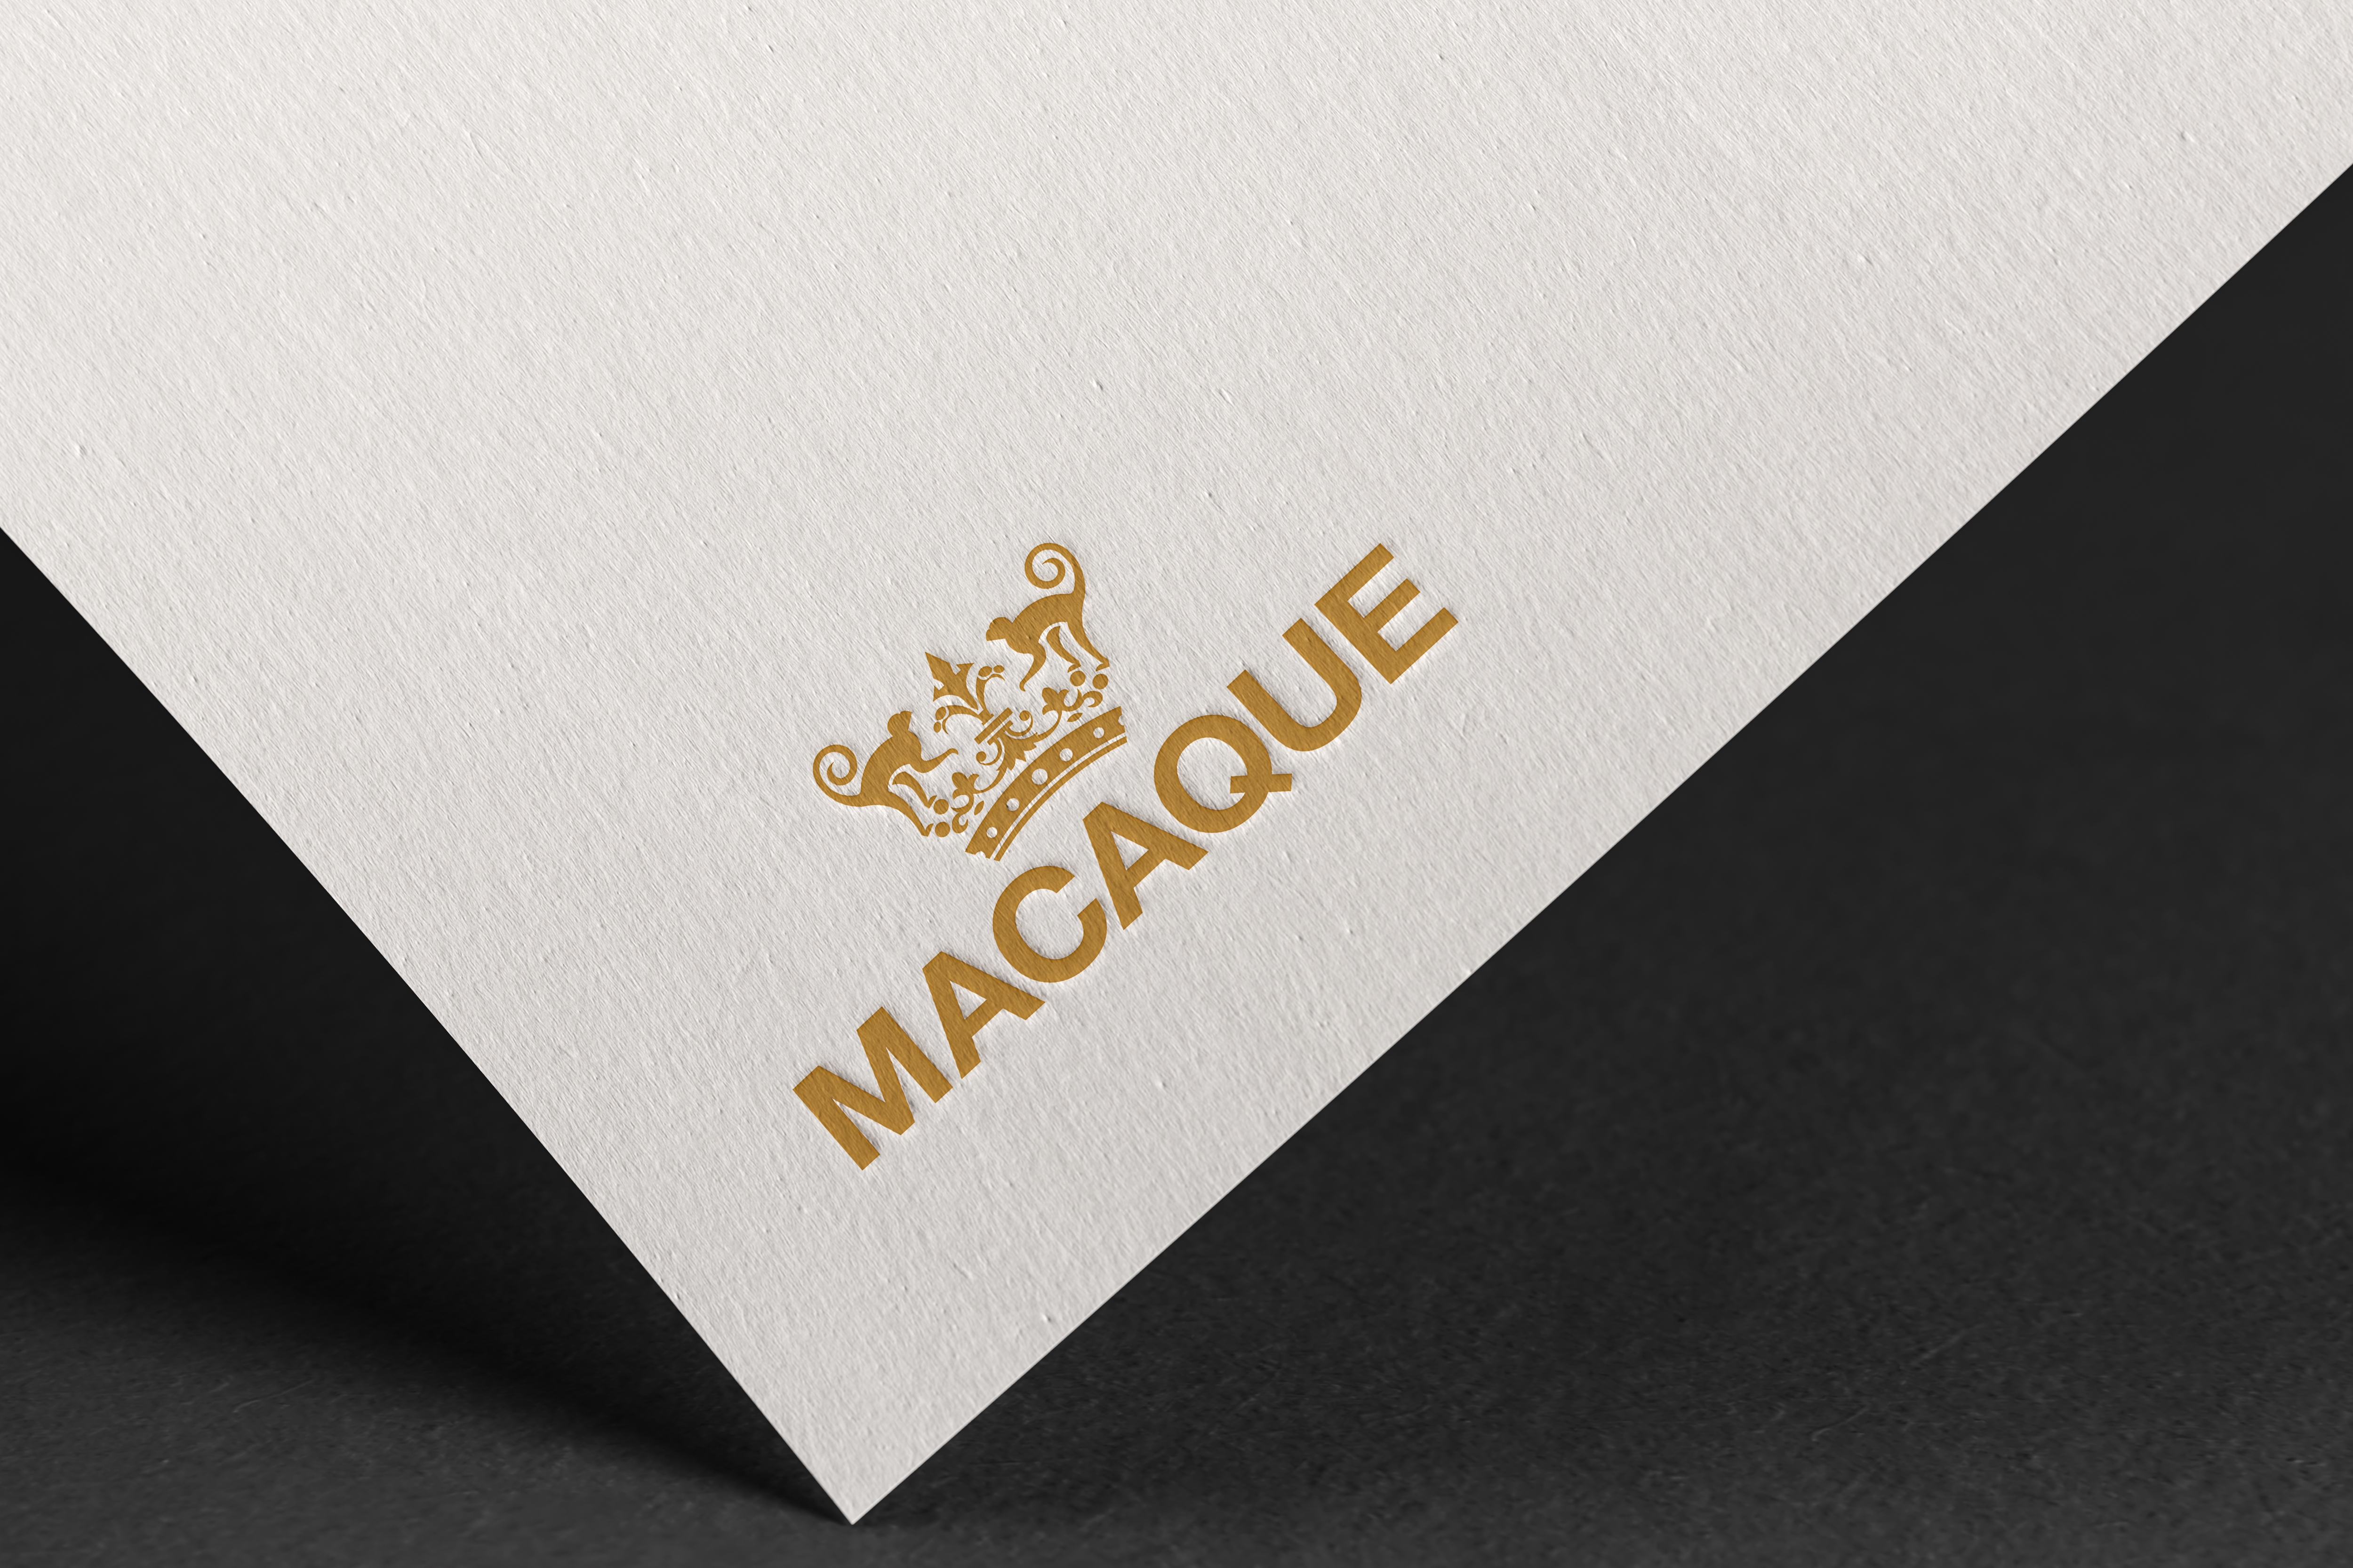 embossed logo macaque